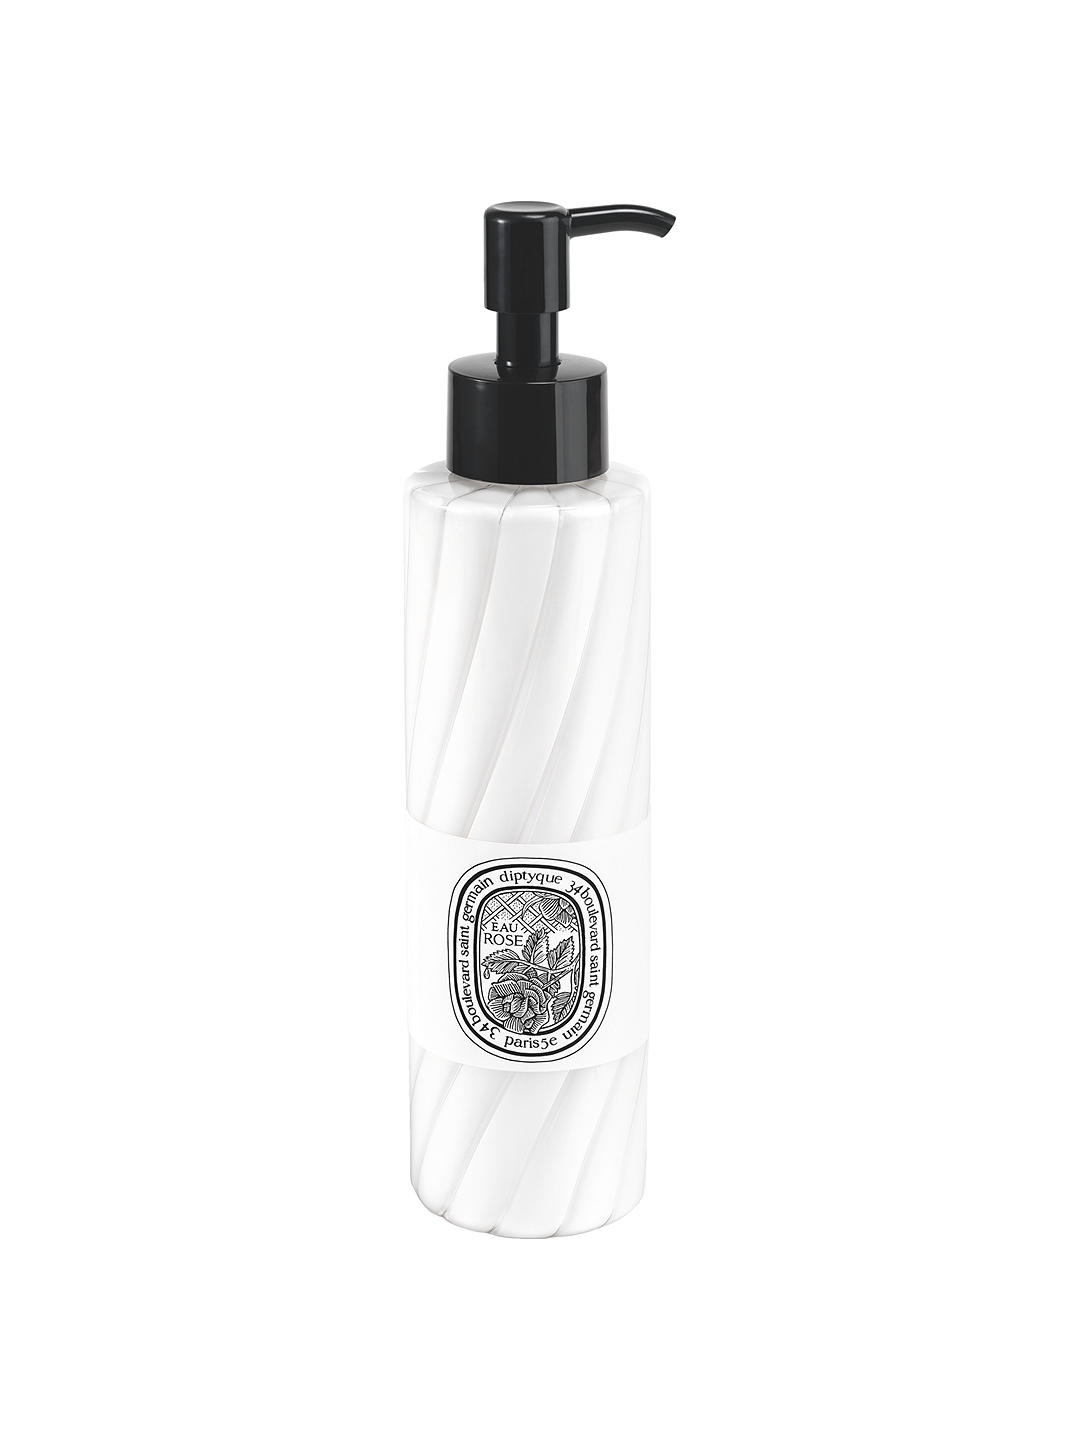 Diptyque Eau Rose Hand & Body Lotion, 200ml 1